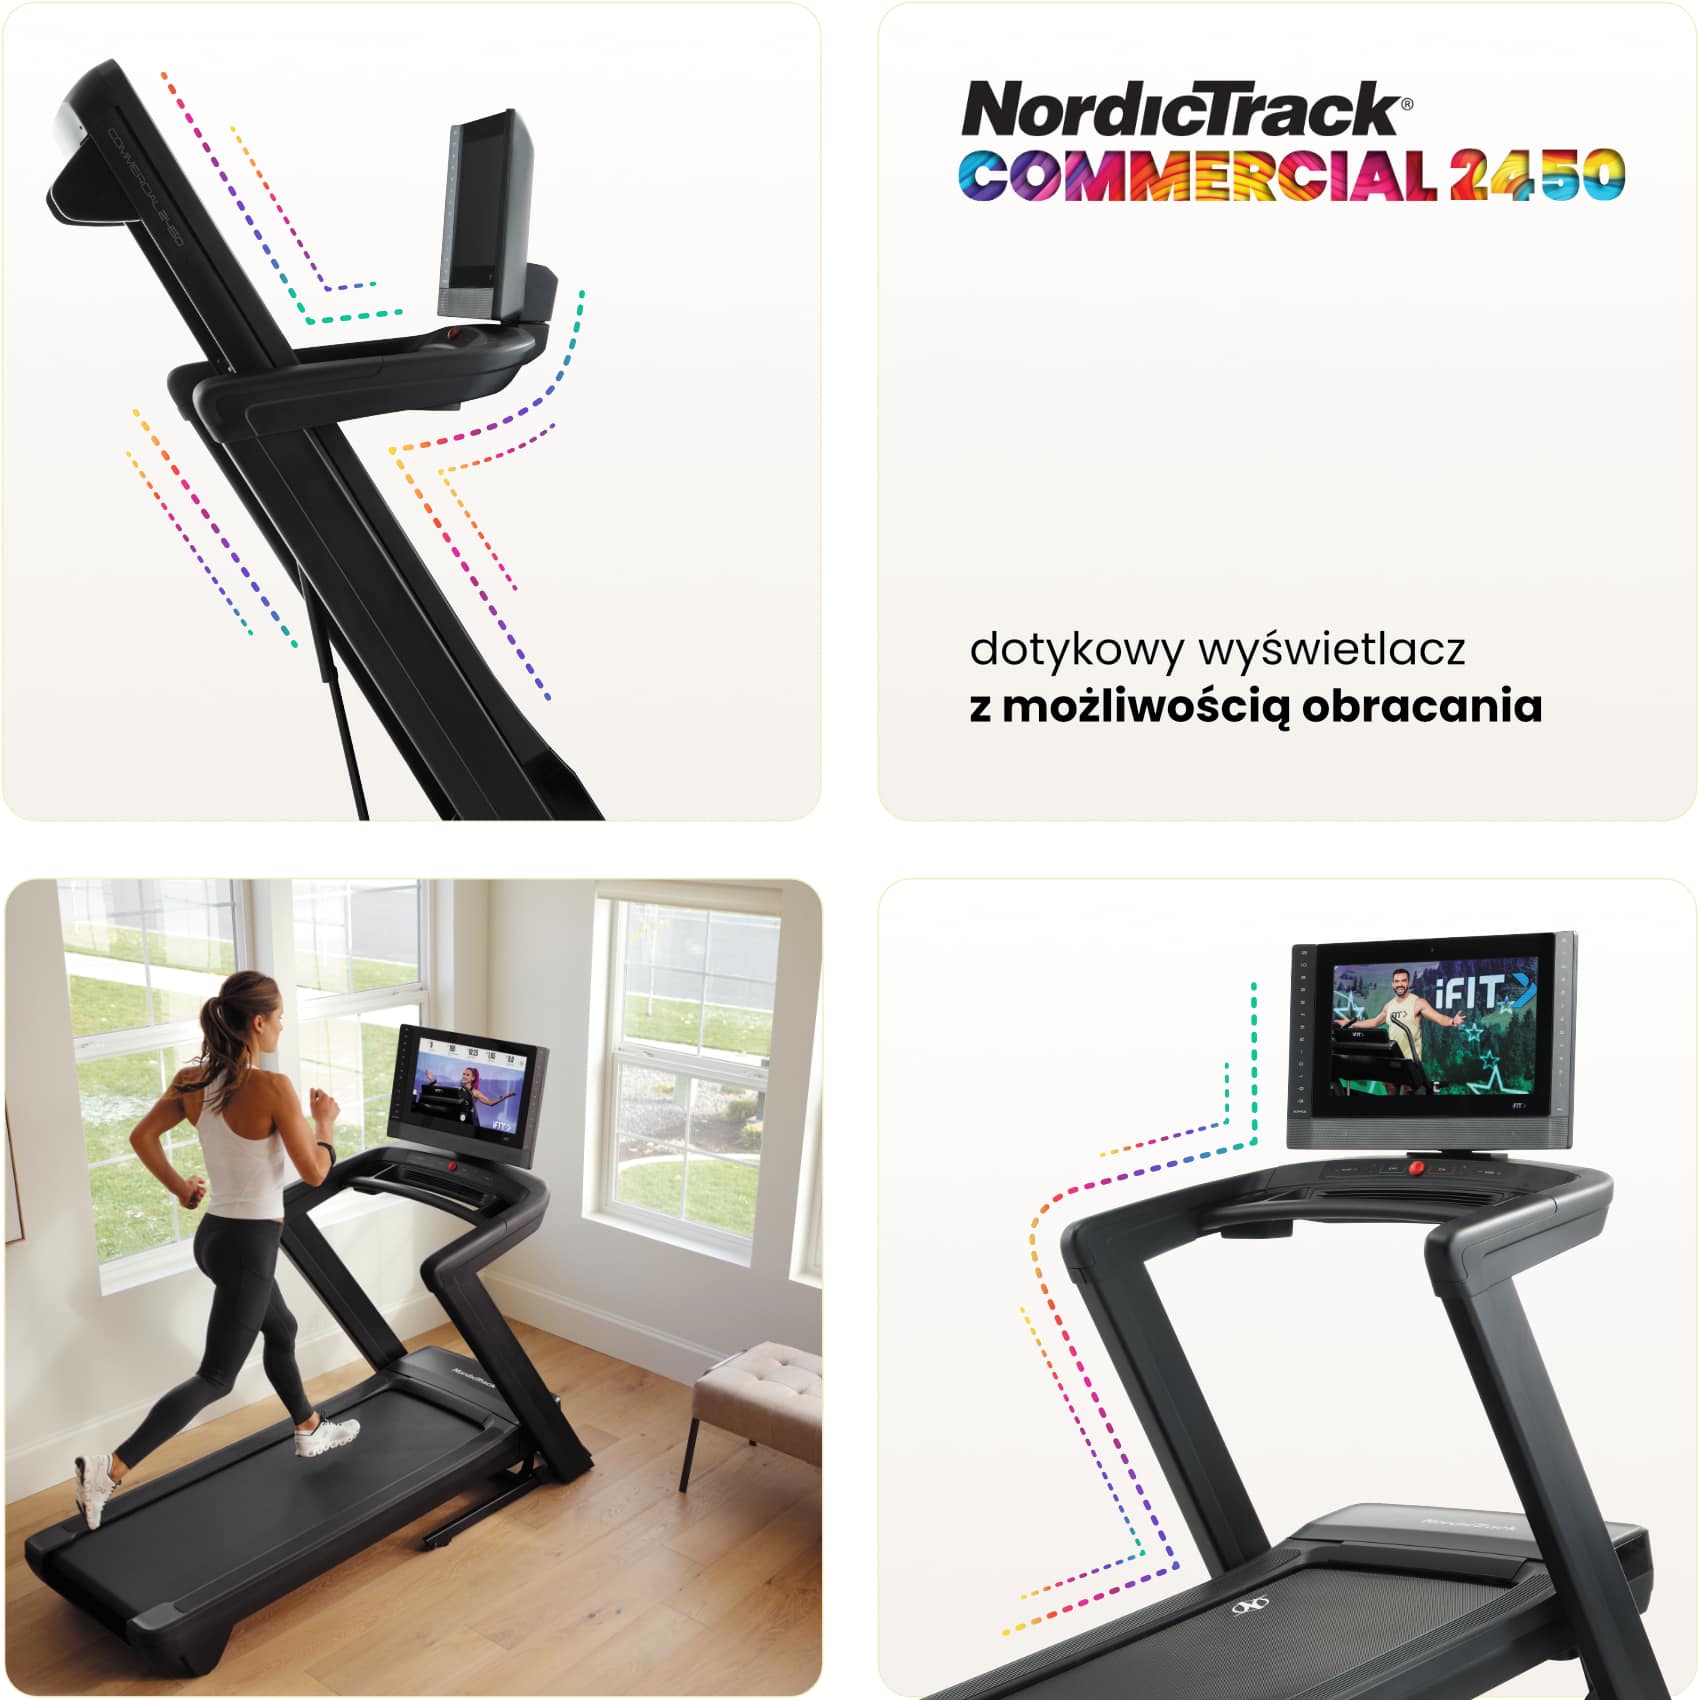 Nordictrack commercial 2450